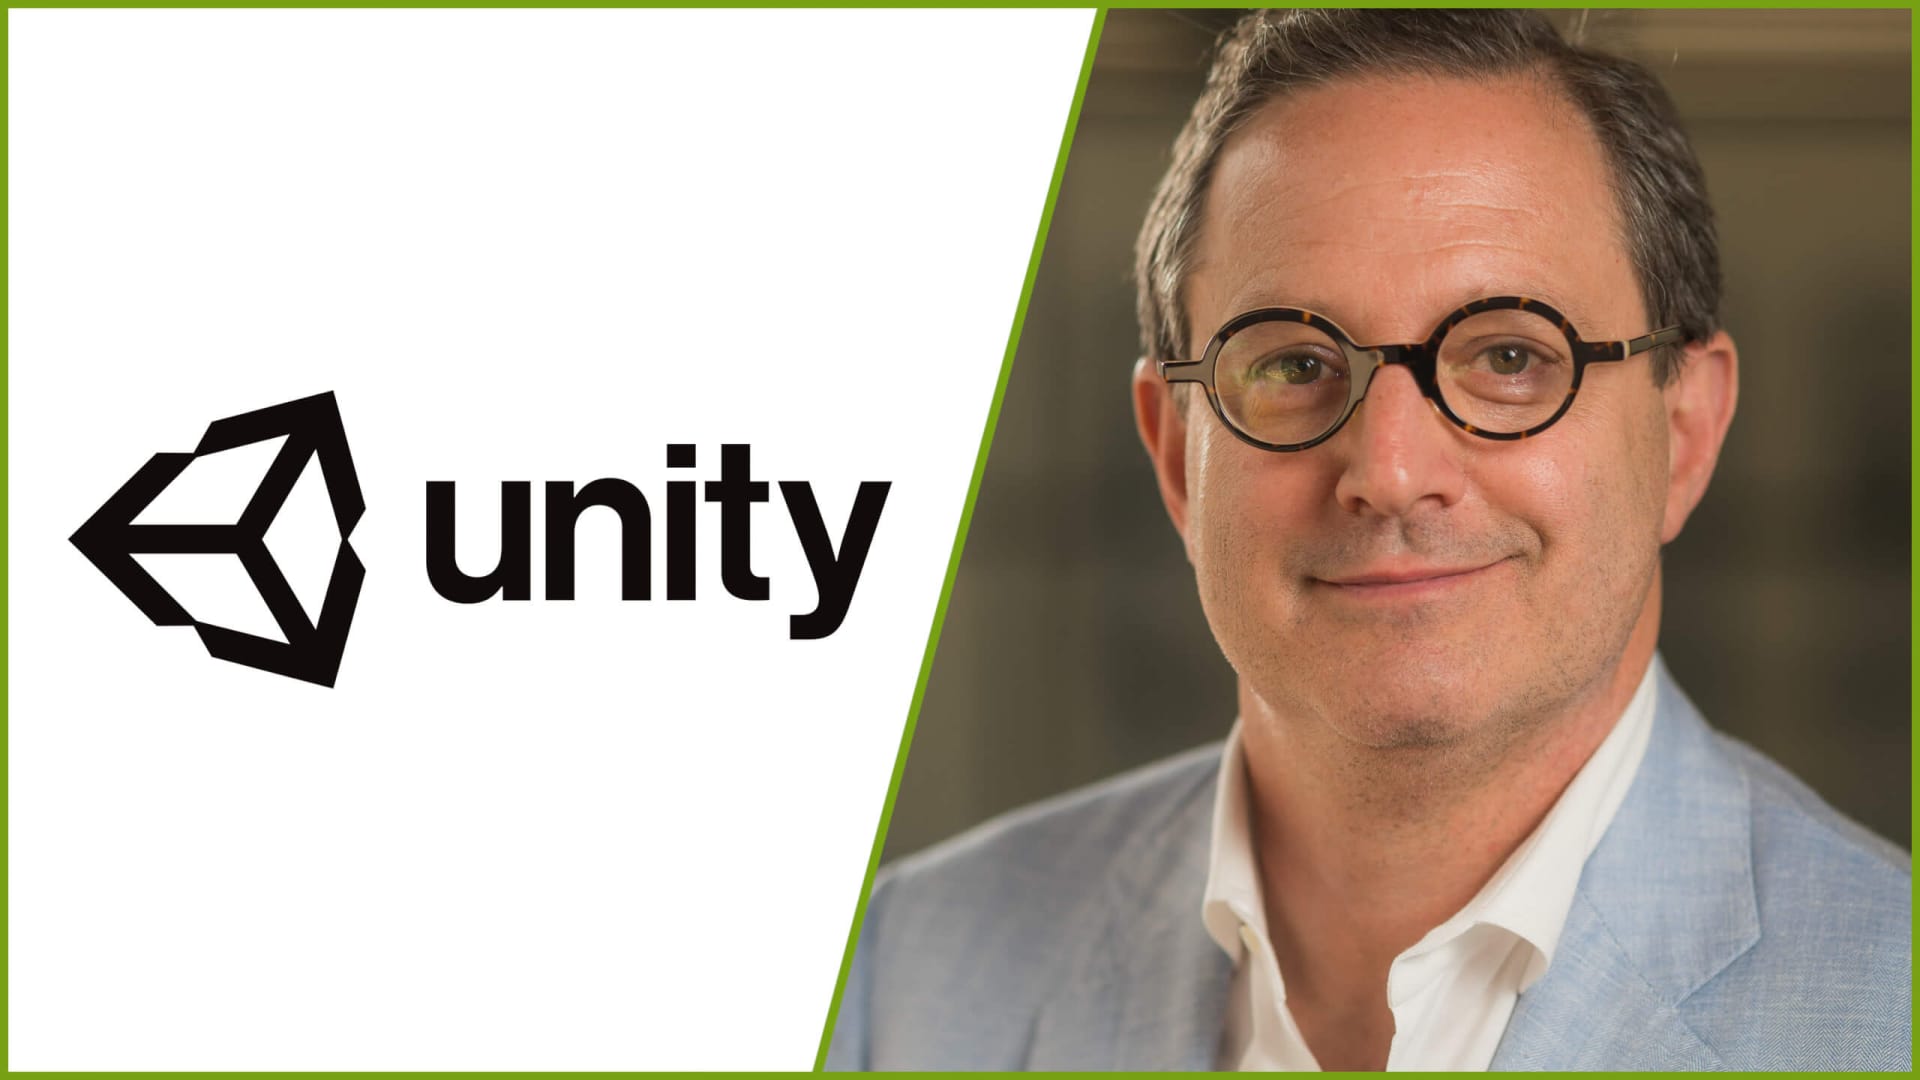 The Unity logo next to a picture of its new CEO Matthew Bromberg